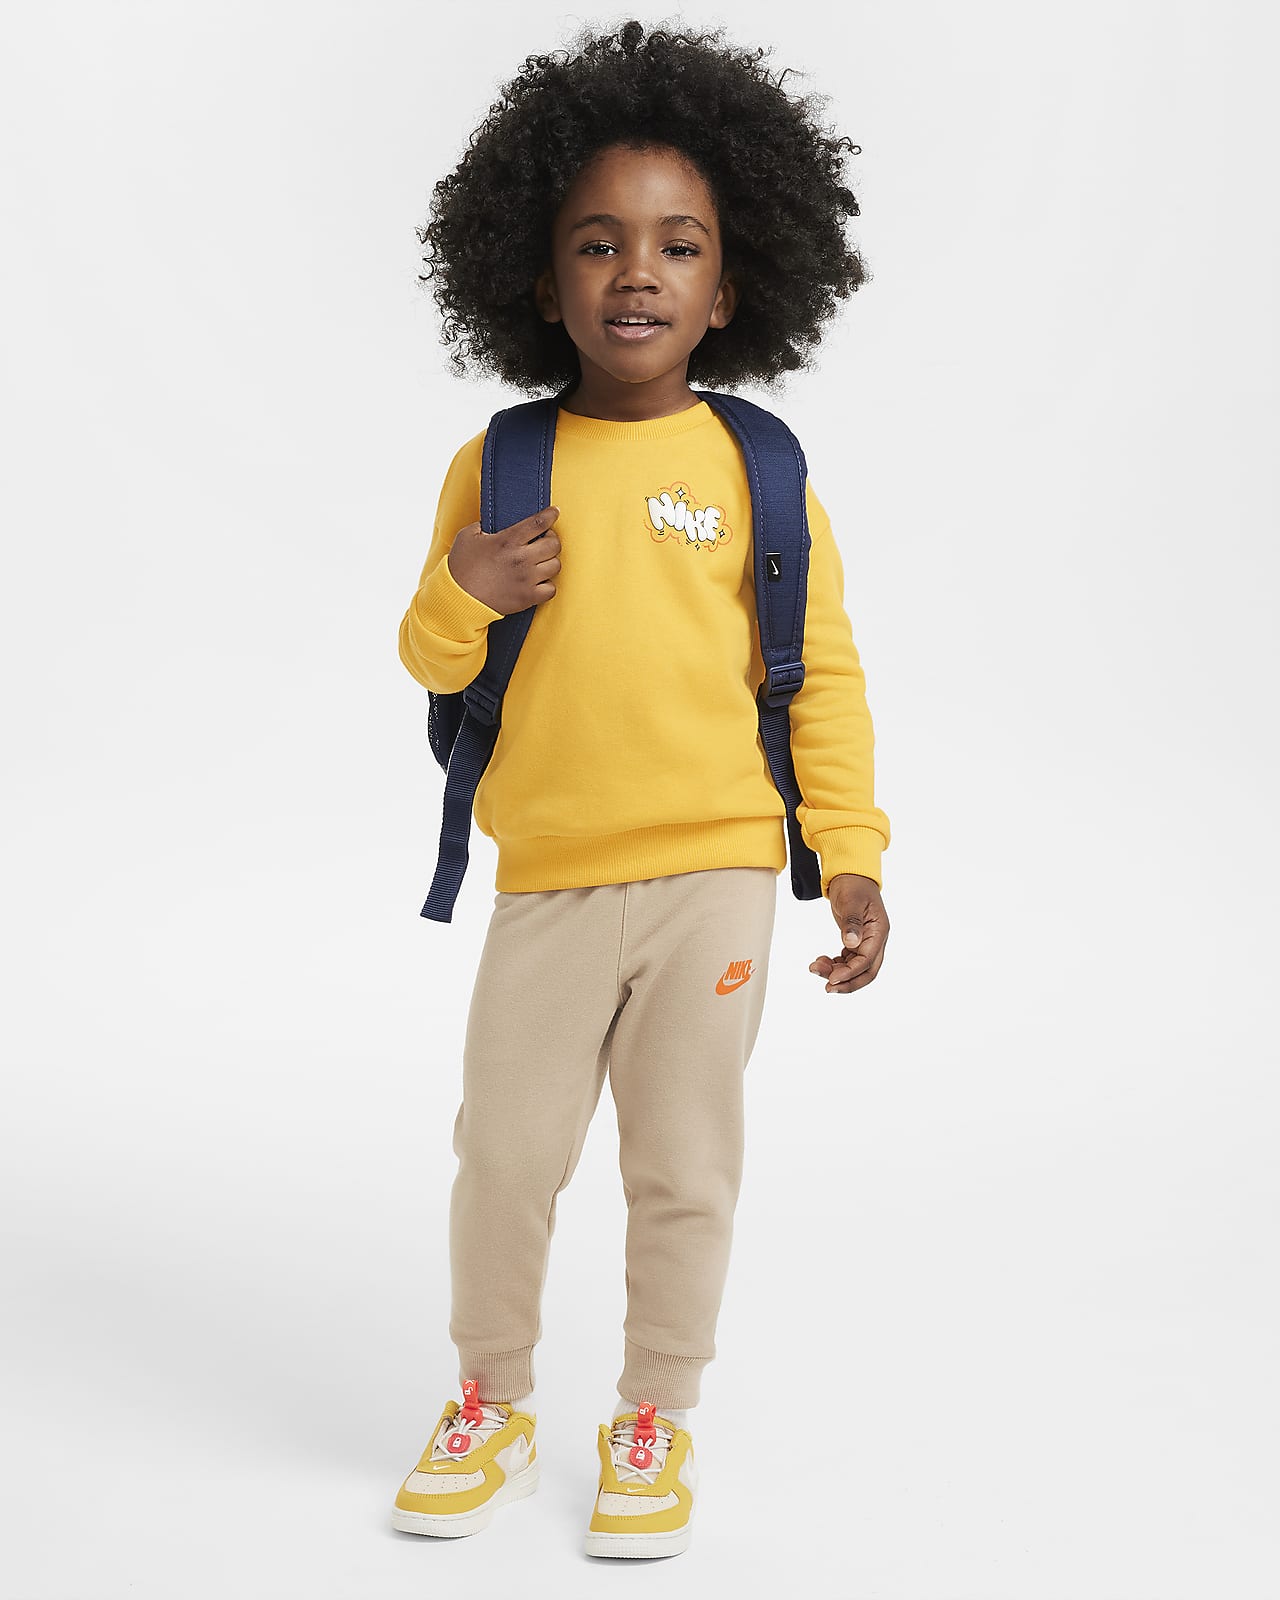 Nike Sportswear Create Your Own Adventure Toddler French Terry Graphic Crew Set